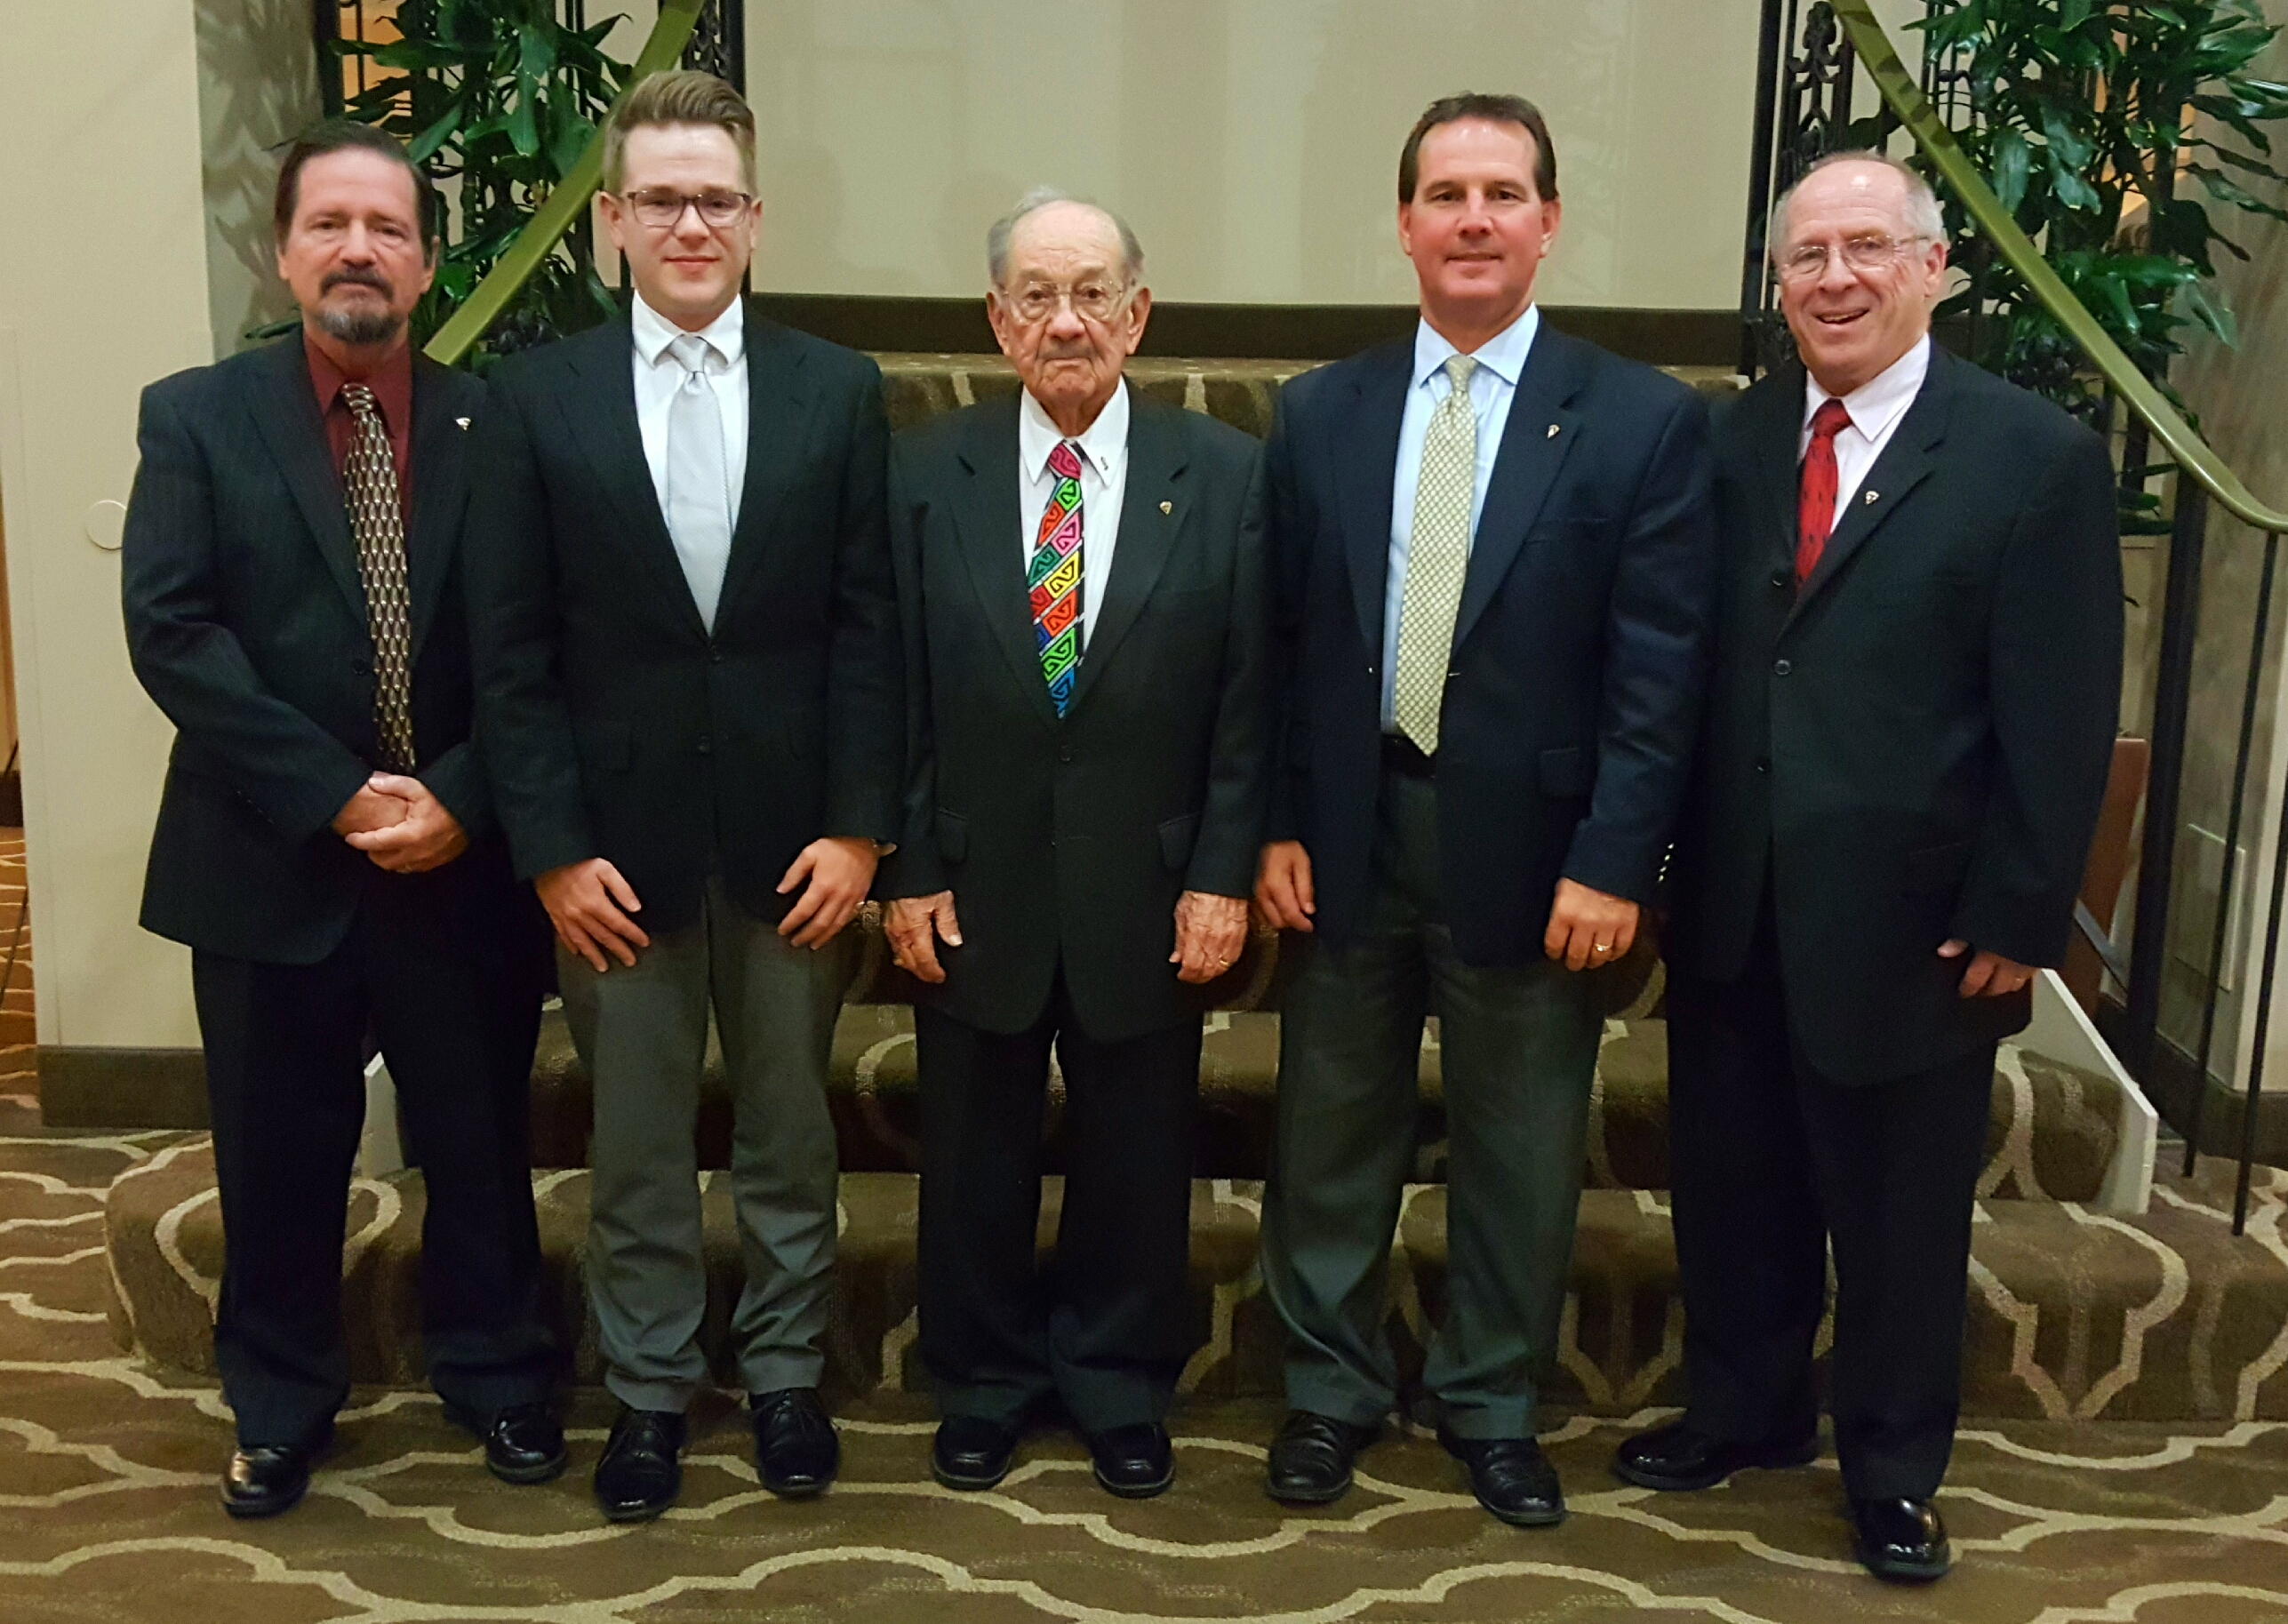 Currently active Brauer Family members include: Vice President William D. Brauer, Operation Manager Benjamin R. Brauer, Chairman William H. Brauer, Vice President Robert G. Brauer and President James L. Truesdell.